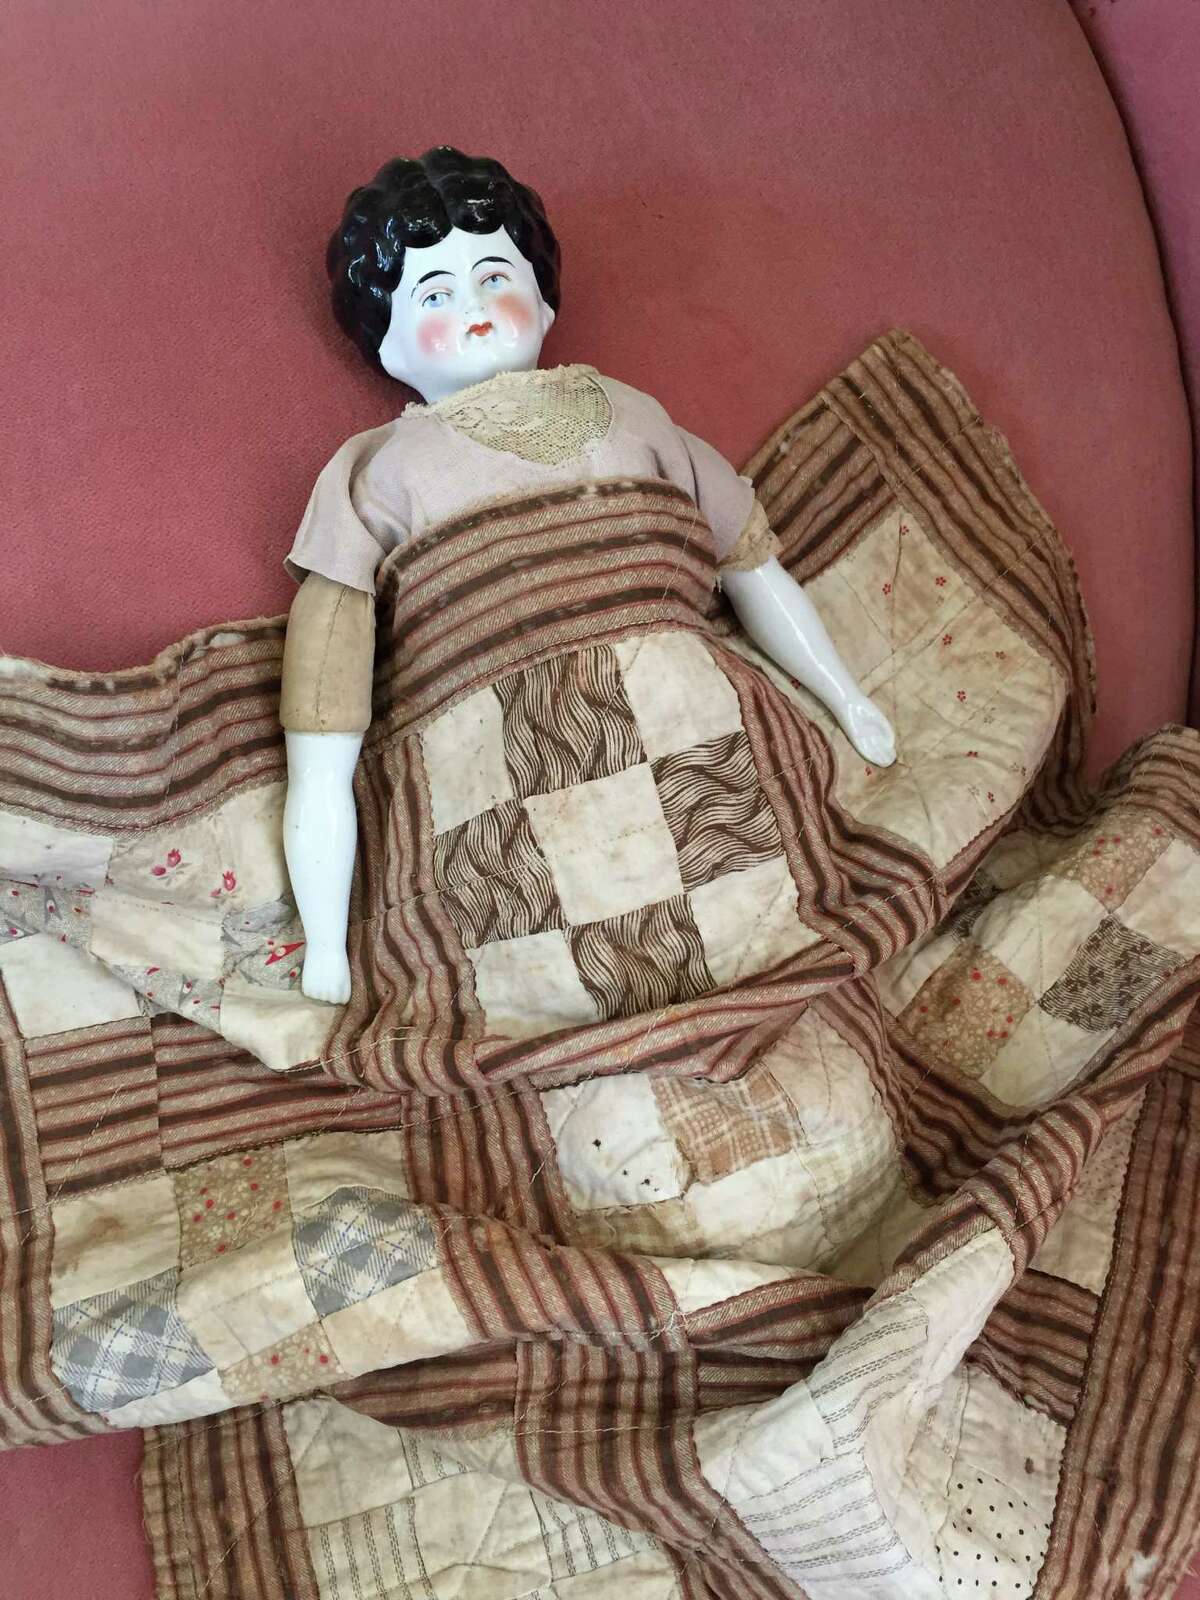 Here's a traditional "Block" doll quilt made by Martha Jane Veal for her daughter Mantie. Martha died at the Dew House in 1907. DeWalt Heritage Center's free exhibit called "Quilting Our Community Together" will be open Sunday afternoons on Oct. 4, 11, 18 and 25.